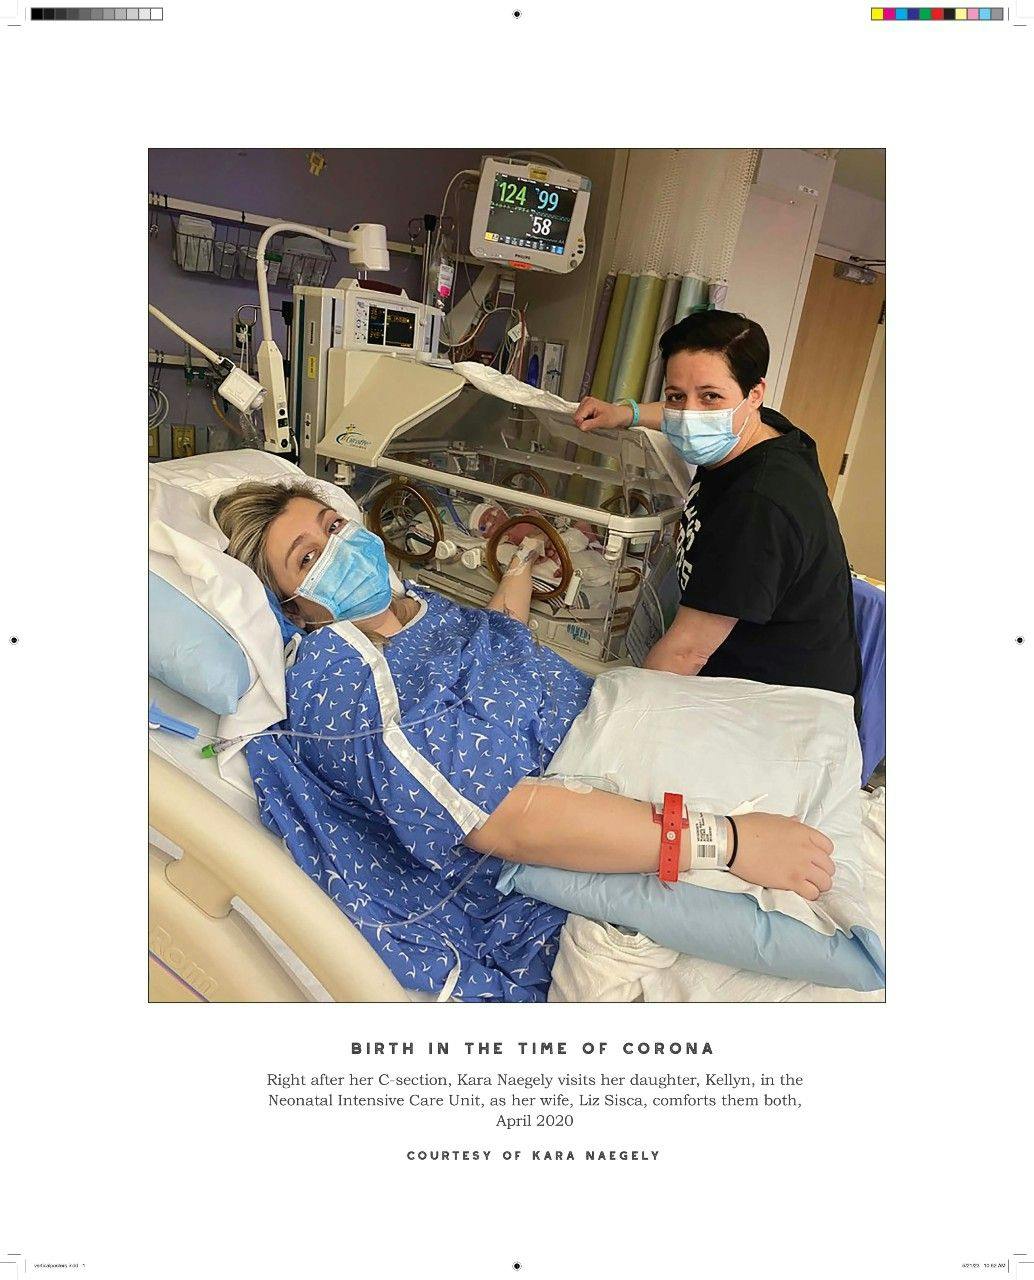 Kara Naegely visits her daughter, Kellyn, in the neonatal intensive care unit, as her wife, Liz Sisca, comforts them both in April 2020.   (Courtesy of Kara Naegely, printed in Corona City)